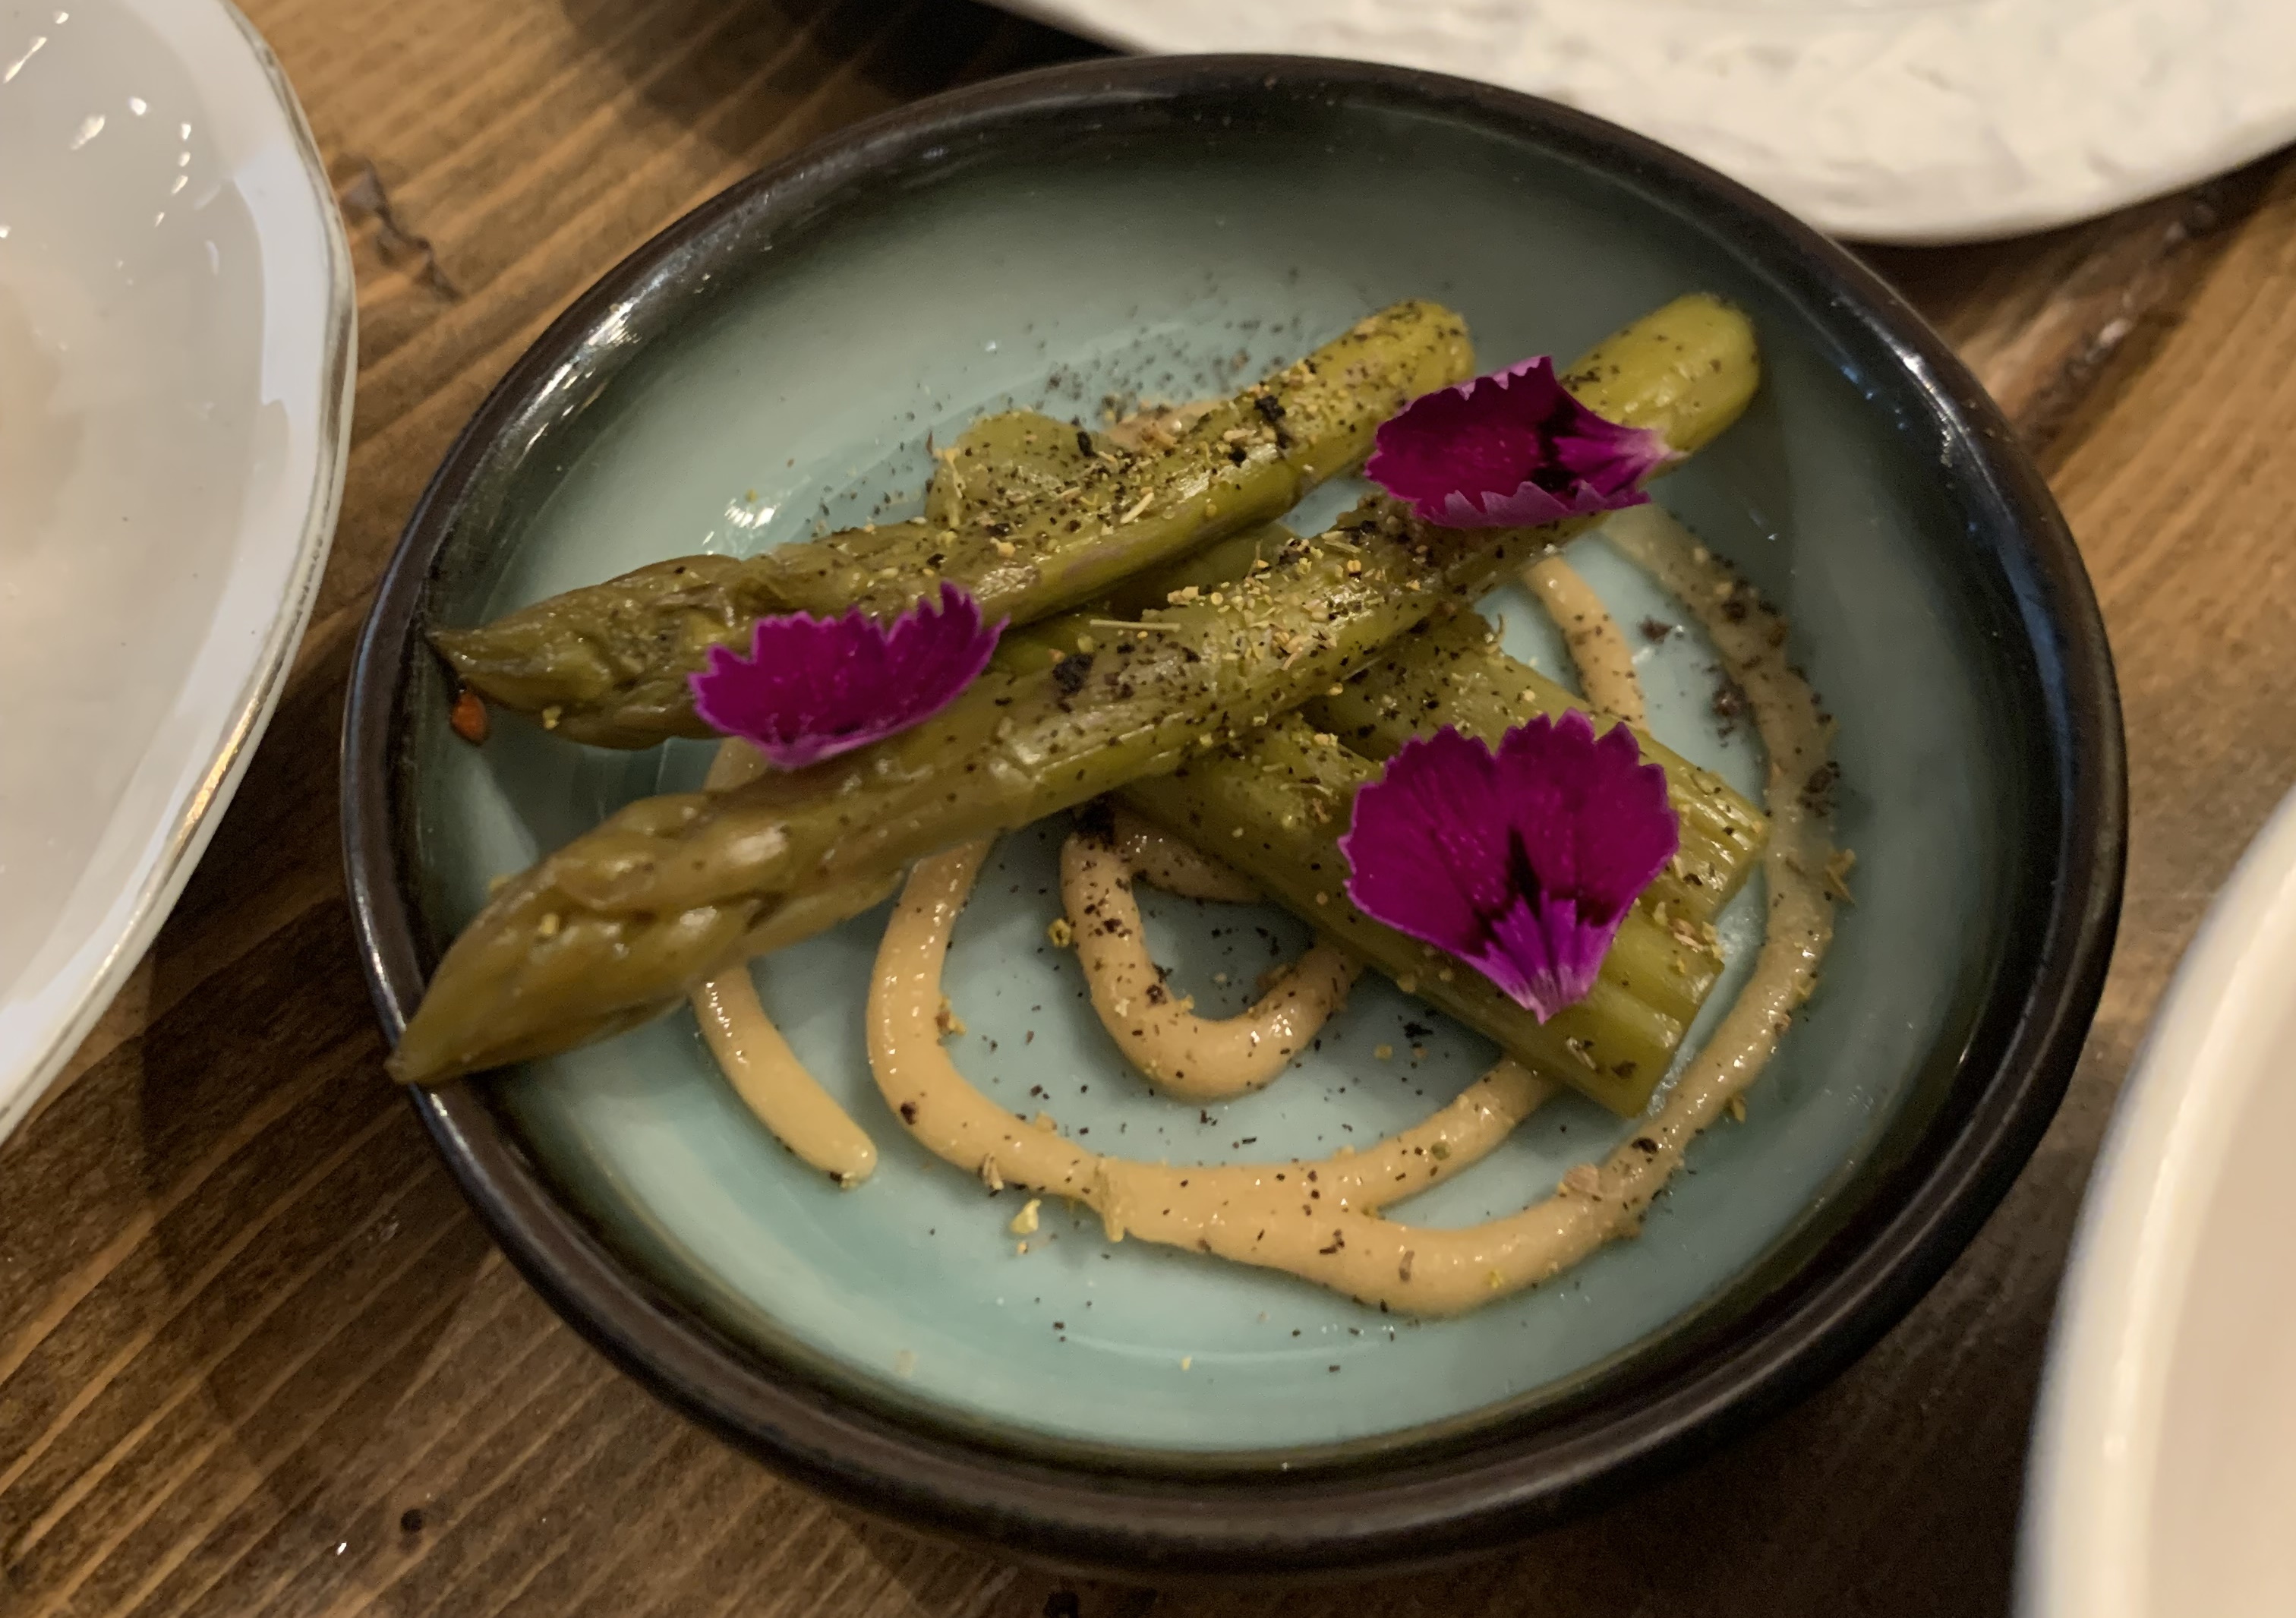 Four thin spears of asparagus arranged in two layers, with the tips perpendicular to the bodies of the spears. There's a lot of seasoning on the spears, and underneath everything is a drizzle of lightly-colored sauce, holding its shape. The dish is garnished with purple flower pedals.